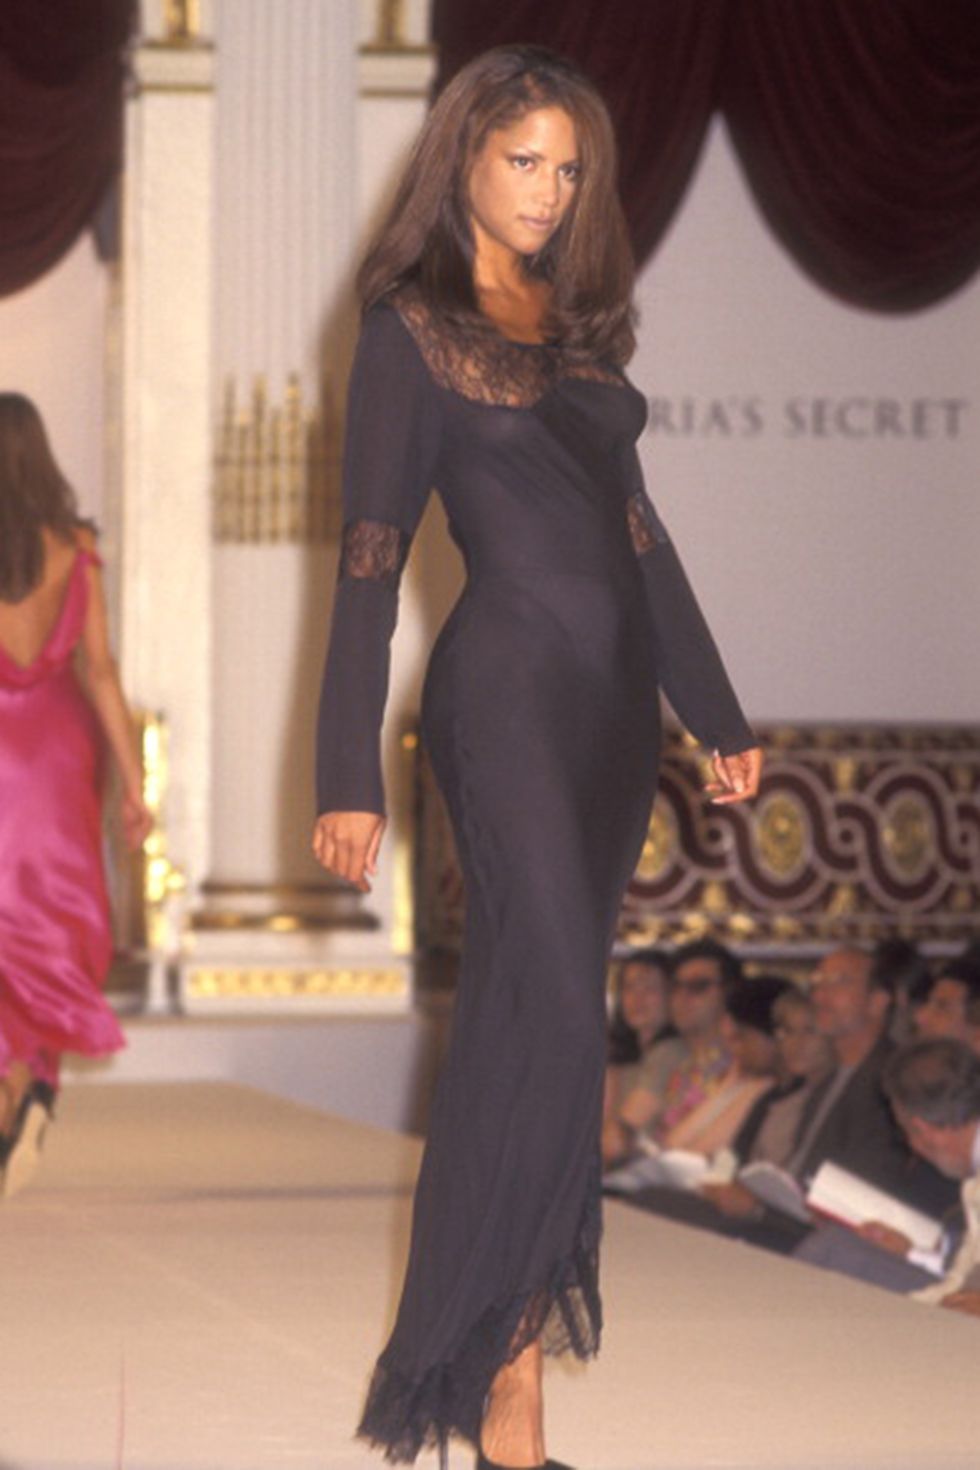 Victoria's Secret Fashion Show History in Photos - Victoria's Secret Models  Over The Years